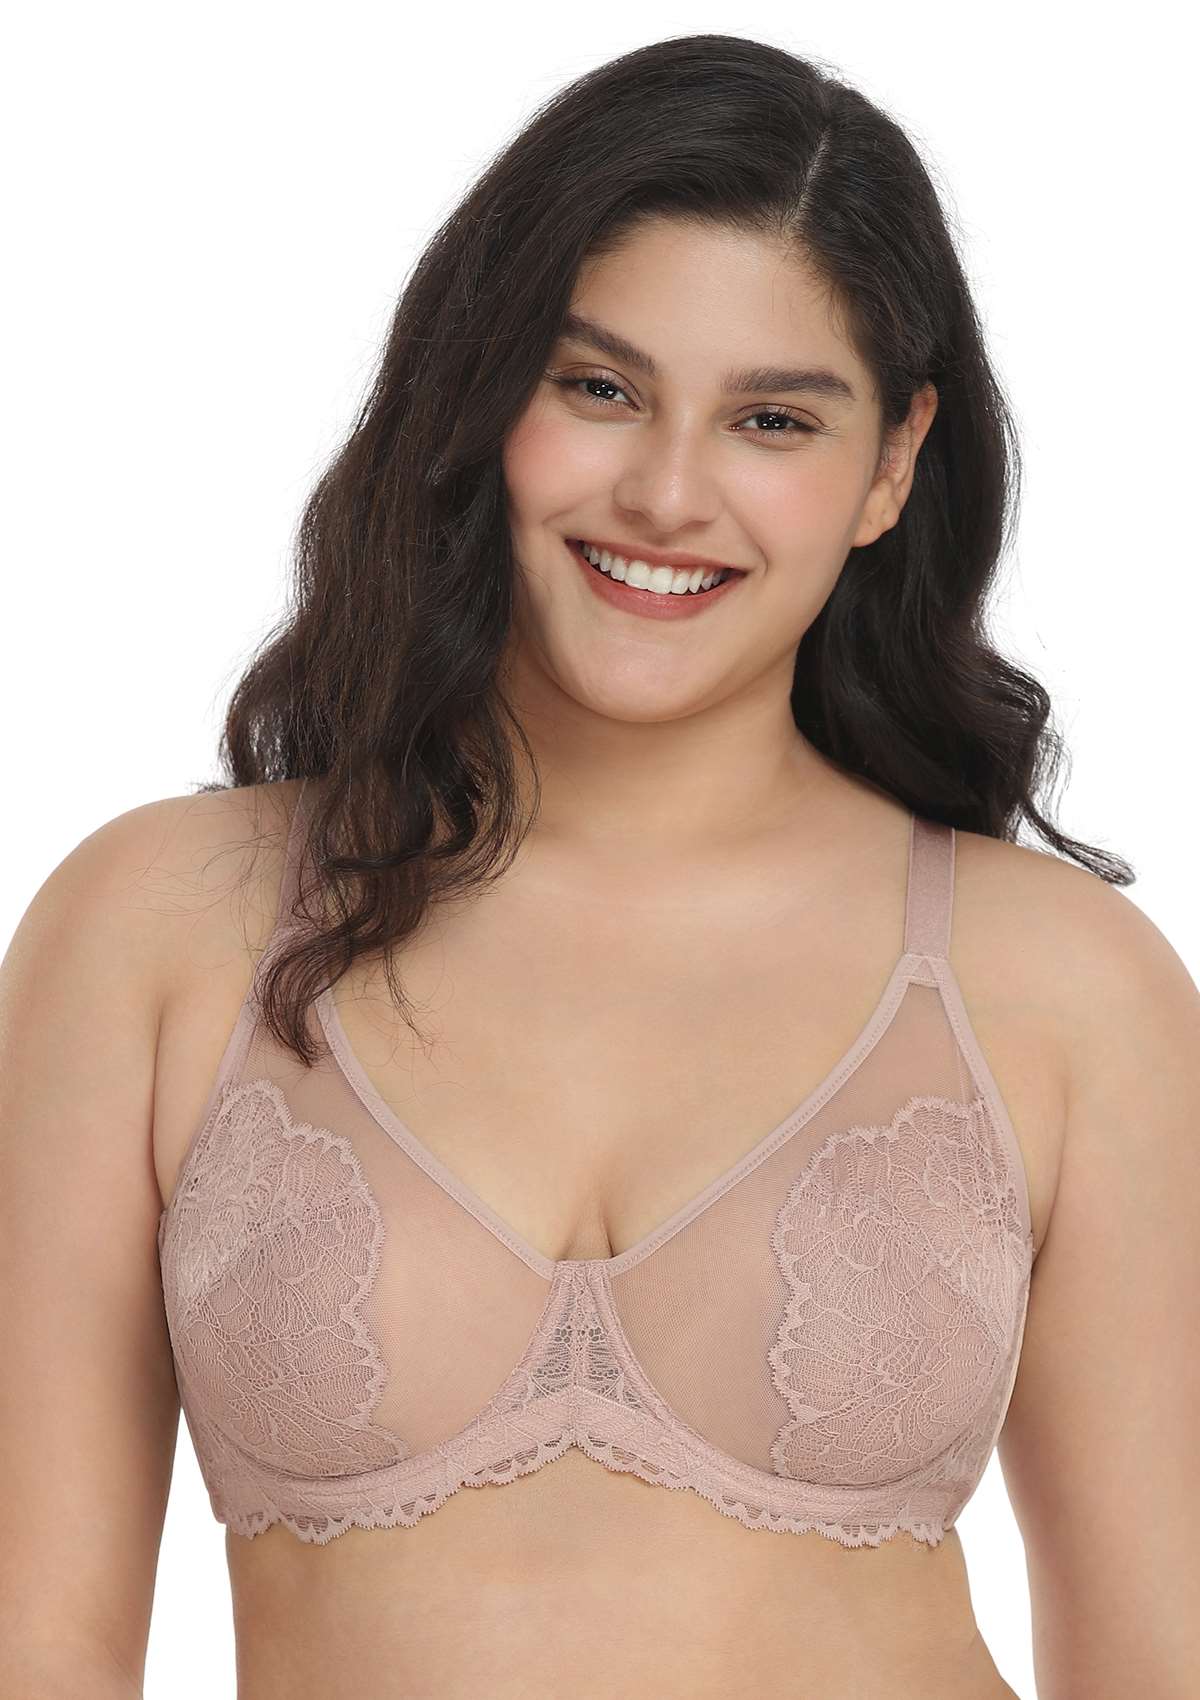 HSIA Blossom Lace Bra And Panties Set: Best Bra For Large Busts - Dark Pink / 34 / G